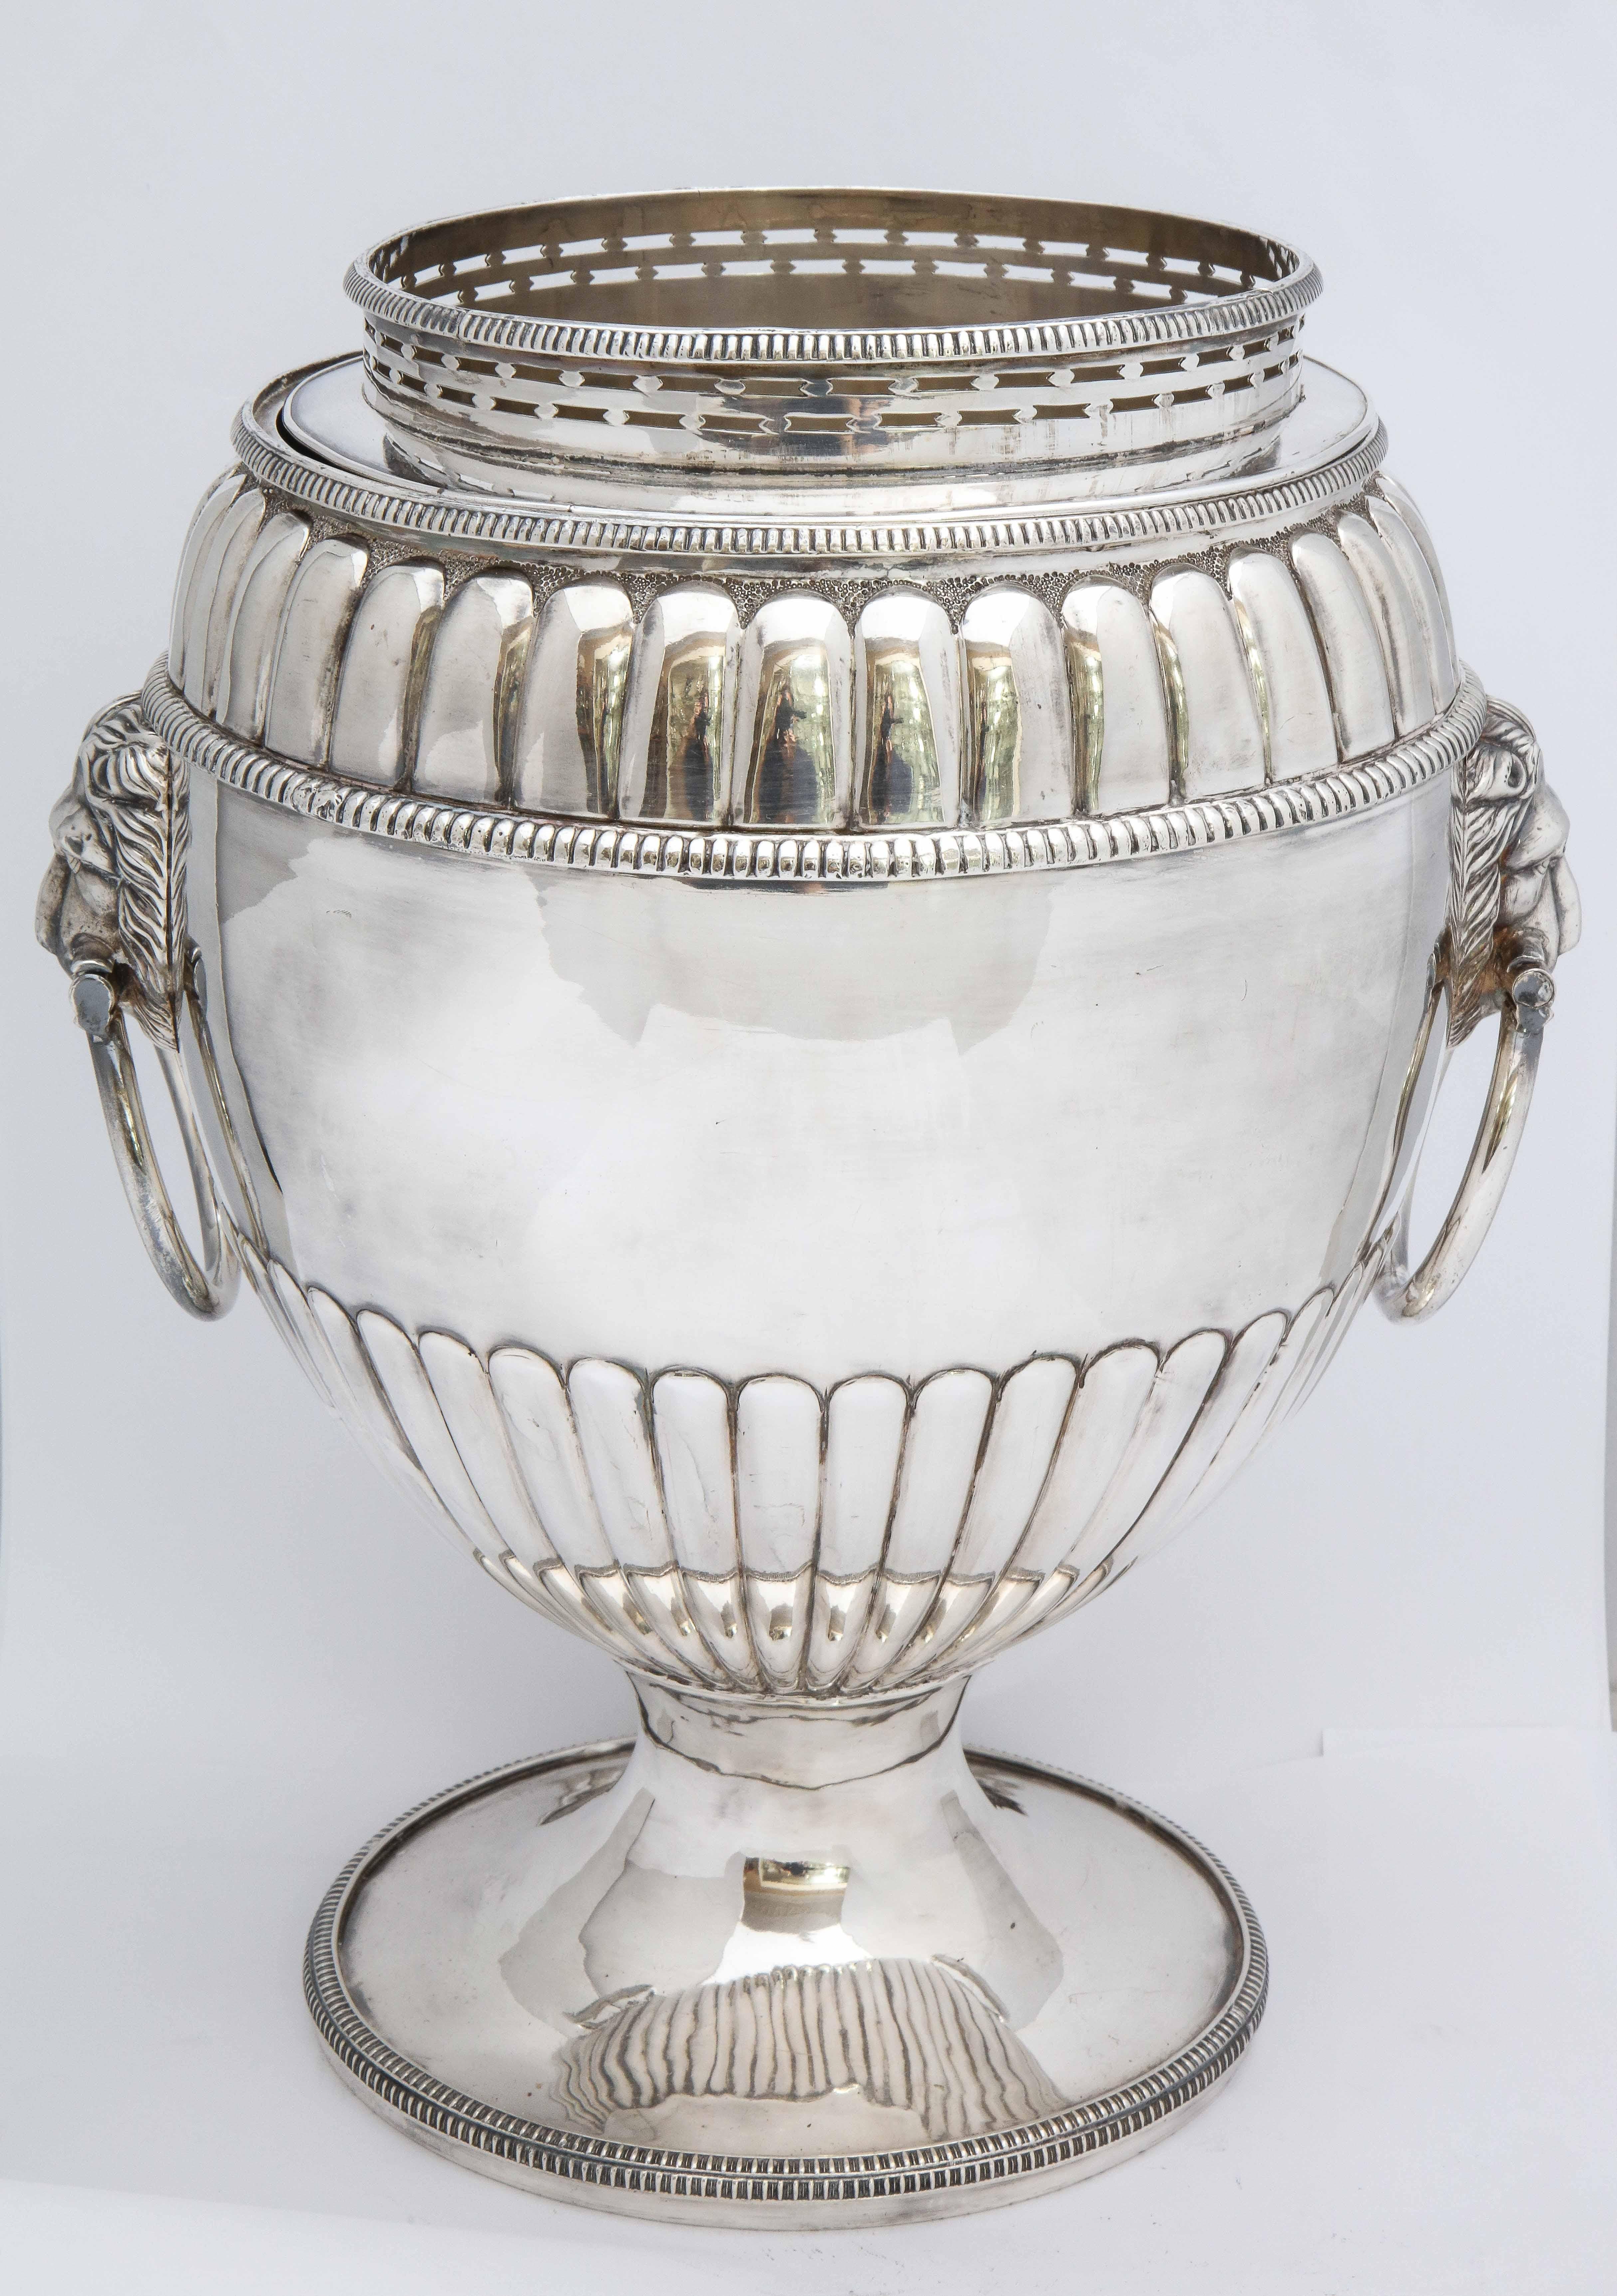 Regency, Sheffield plated, pedestal based wine cooler, England, Ca. 1840's. Has lion's head handles, with each lion having a movable ring in its mouth. Cooler has original insert and removable collar. Fluted design; vacant cartouche. Rim is very